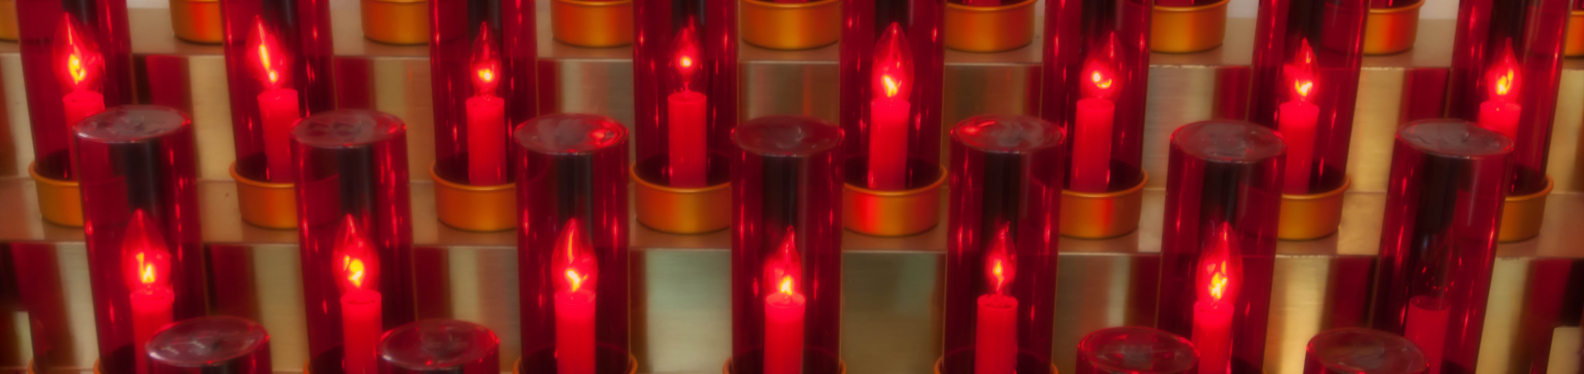 Red Votive candles in 2 rows all lit